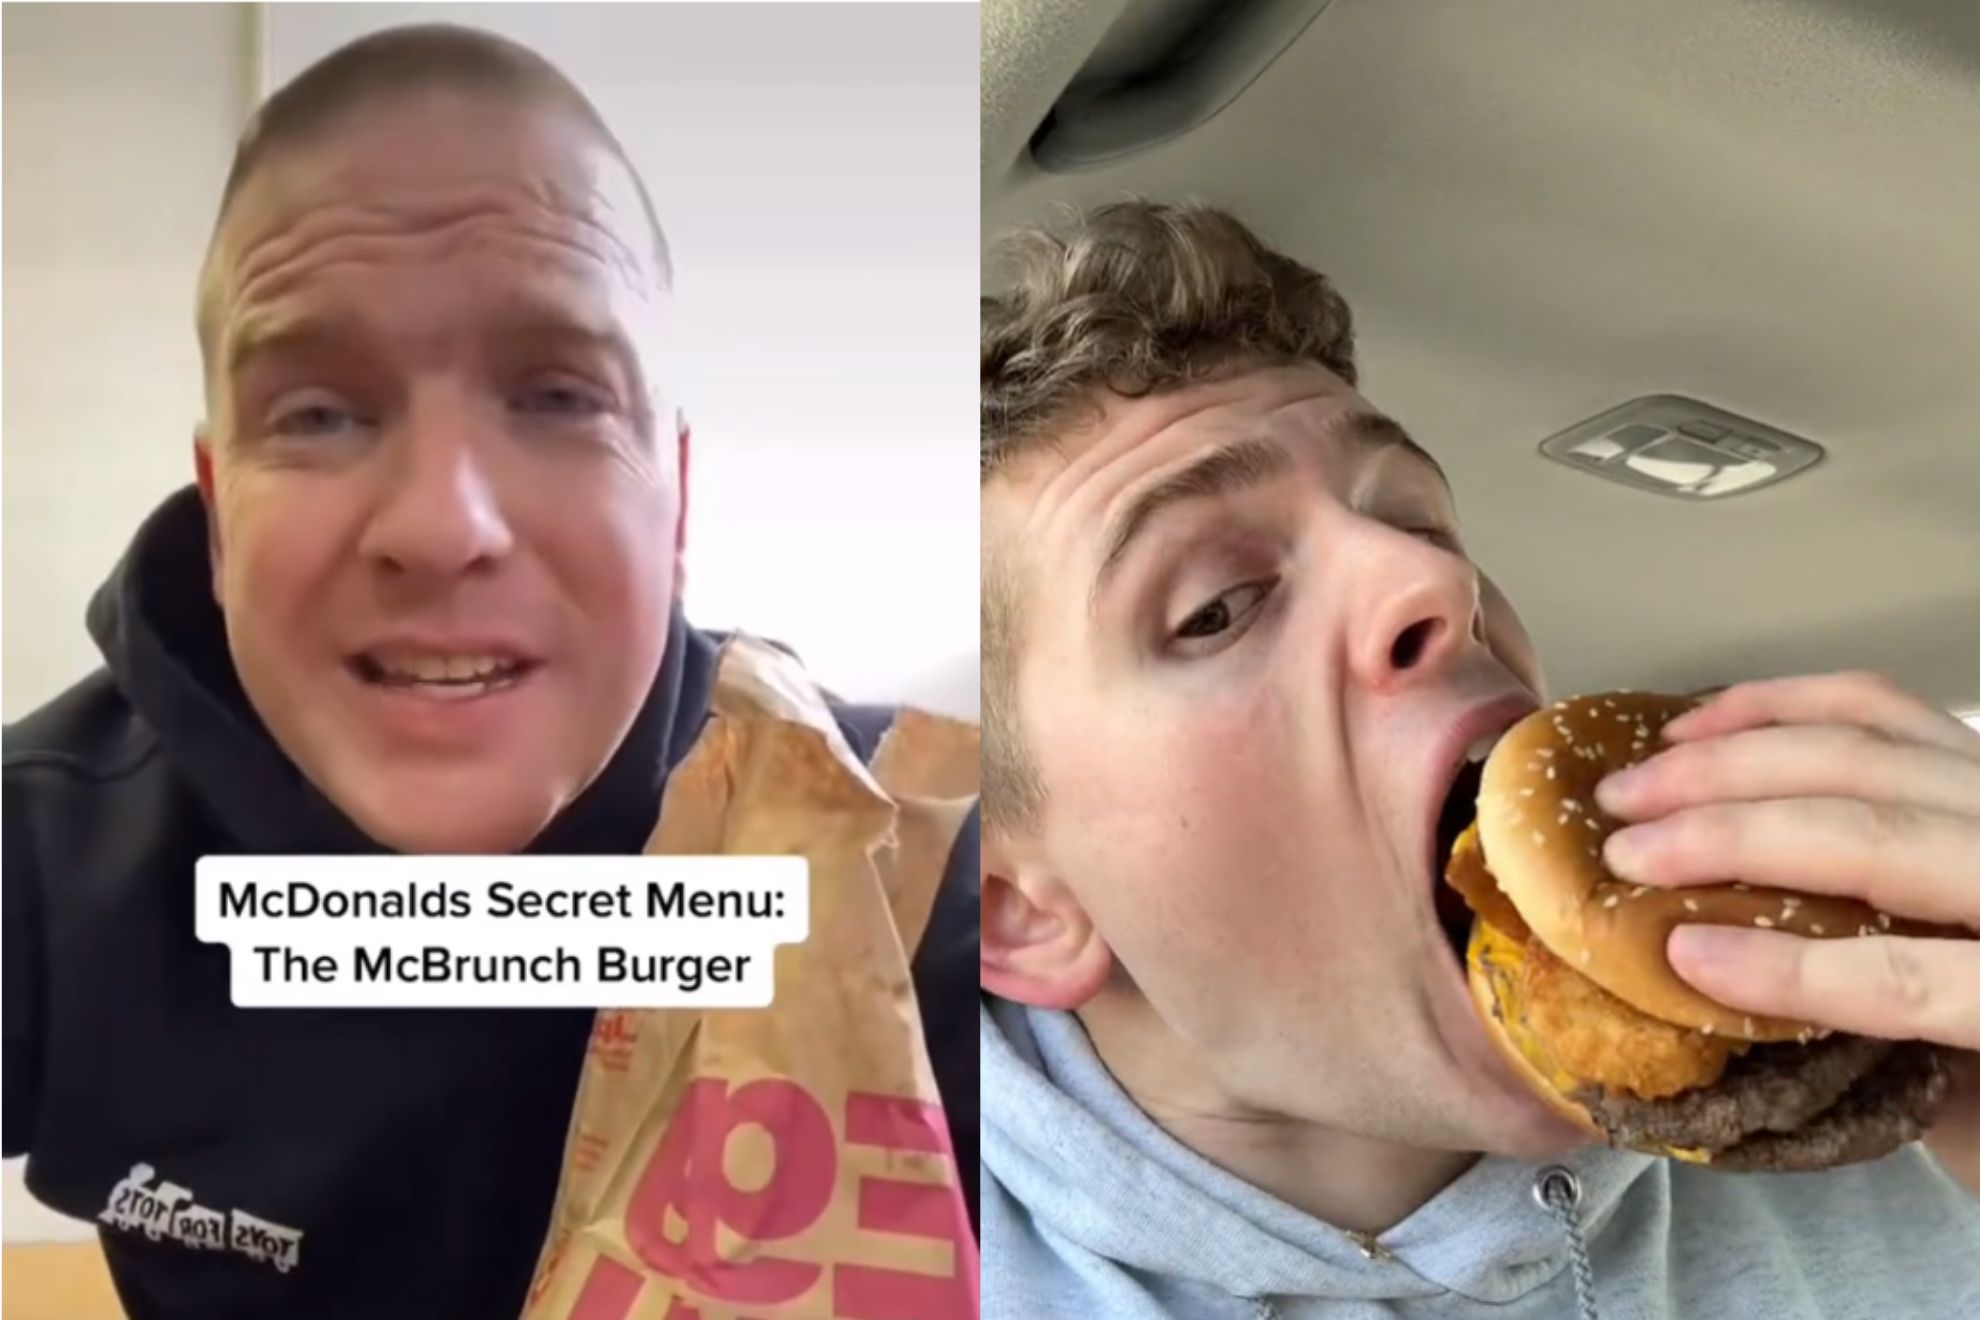 A TikTok user uncovering the existence of McDonald's 'McBrunch' or 'Mc10:35' burger sent users on a mission to order the hidden menu item.